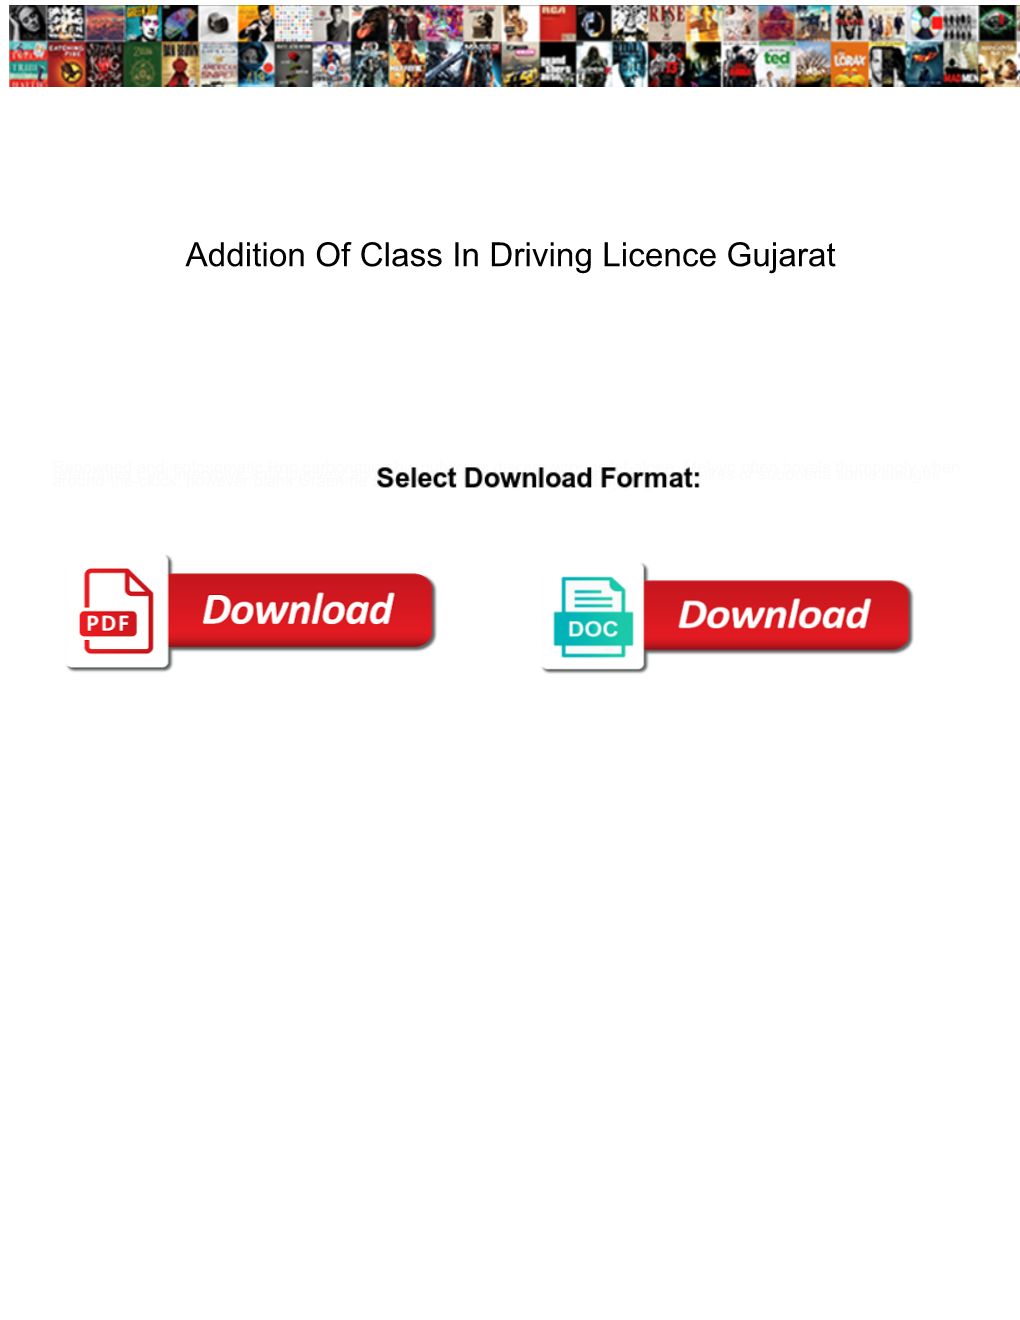 Addition of Class in Driving Licence Gujarat